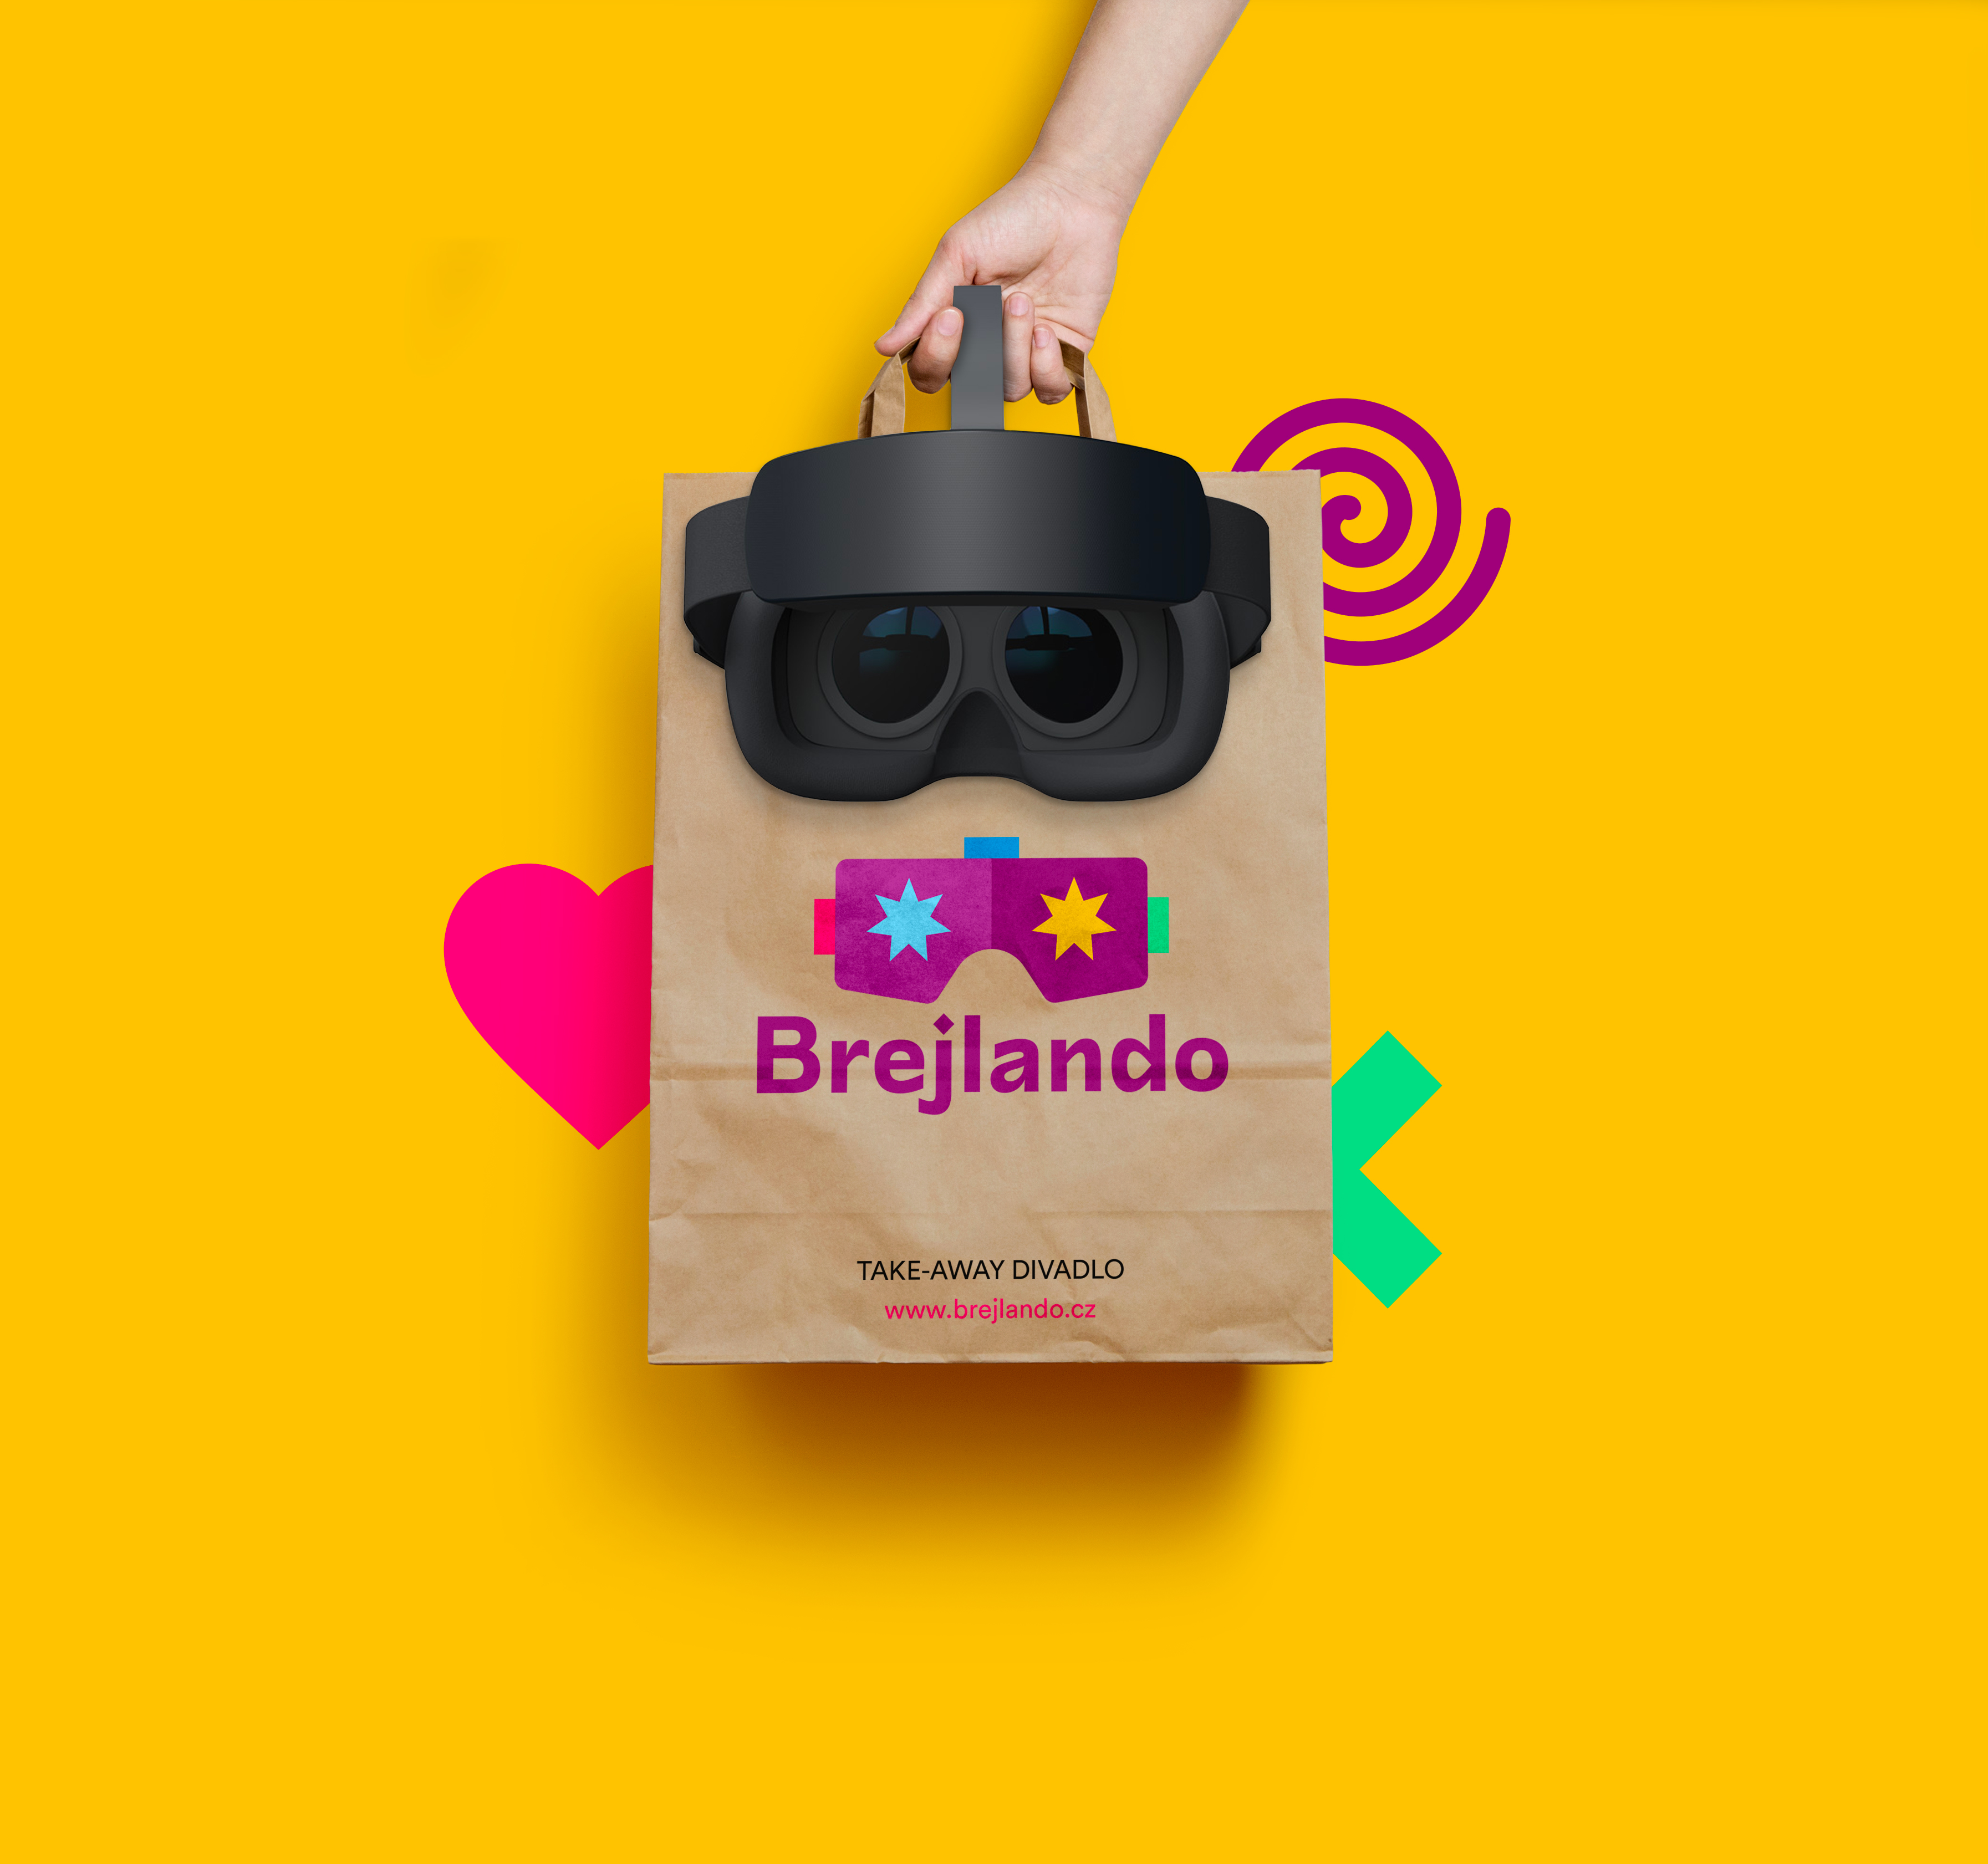 VR glasses from the project Brejlando